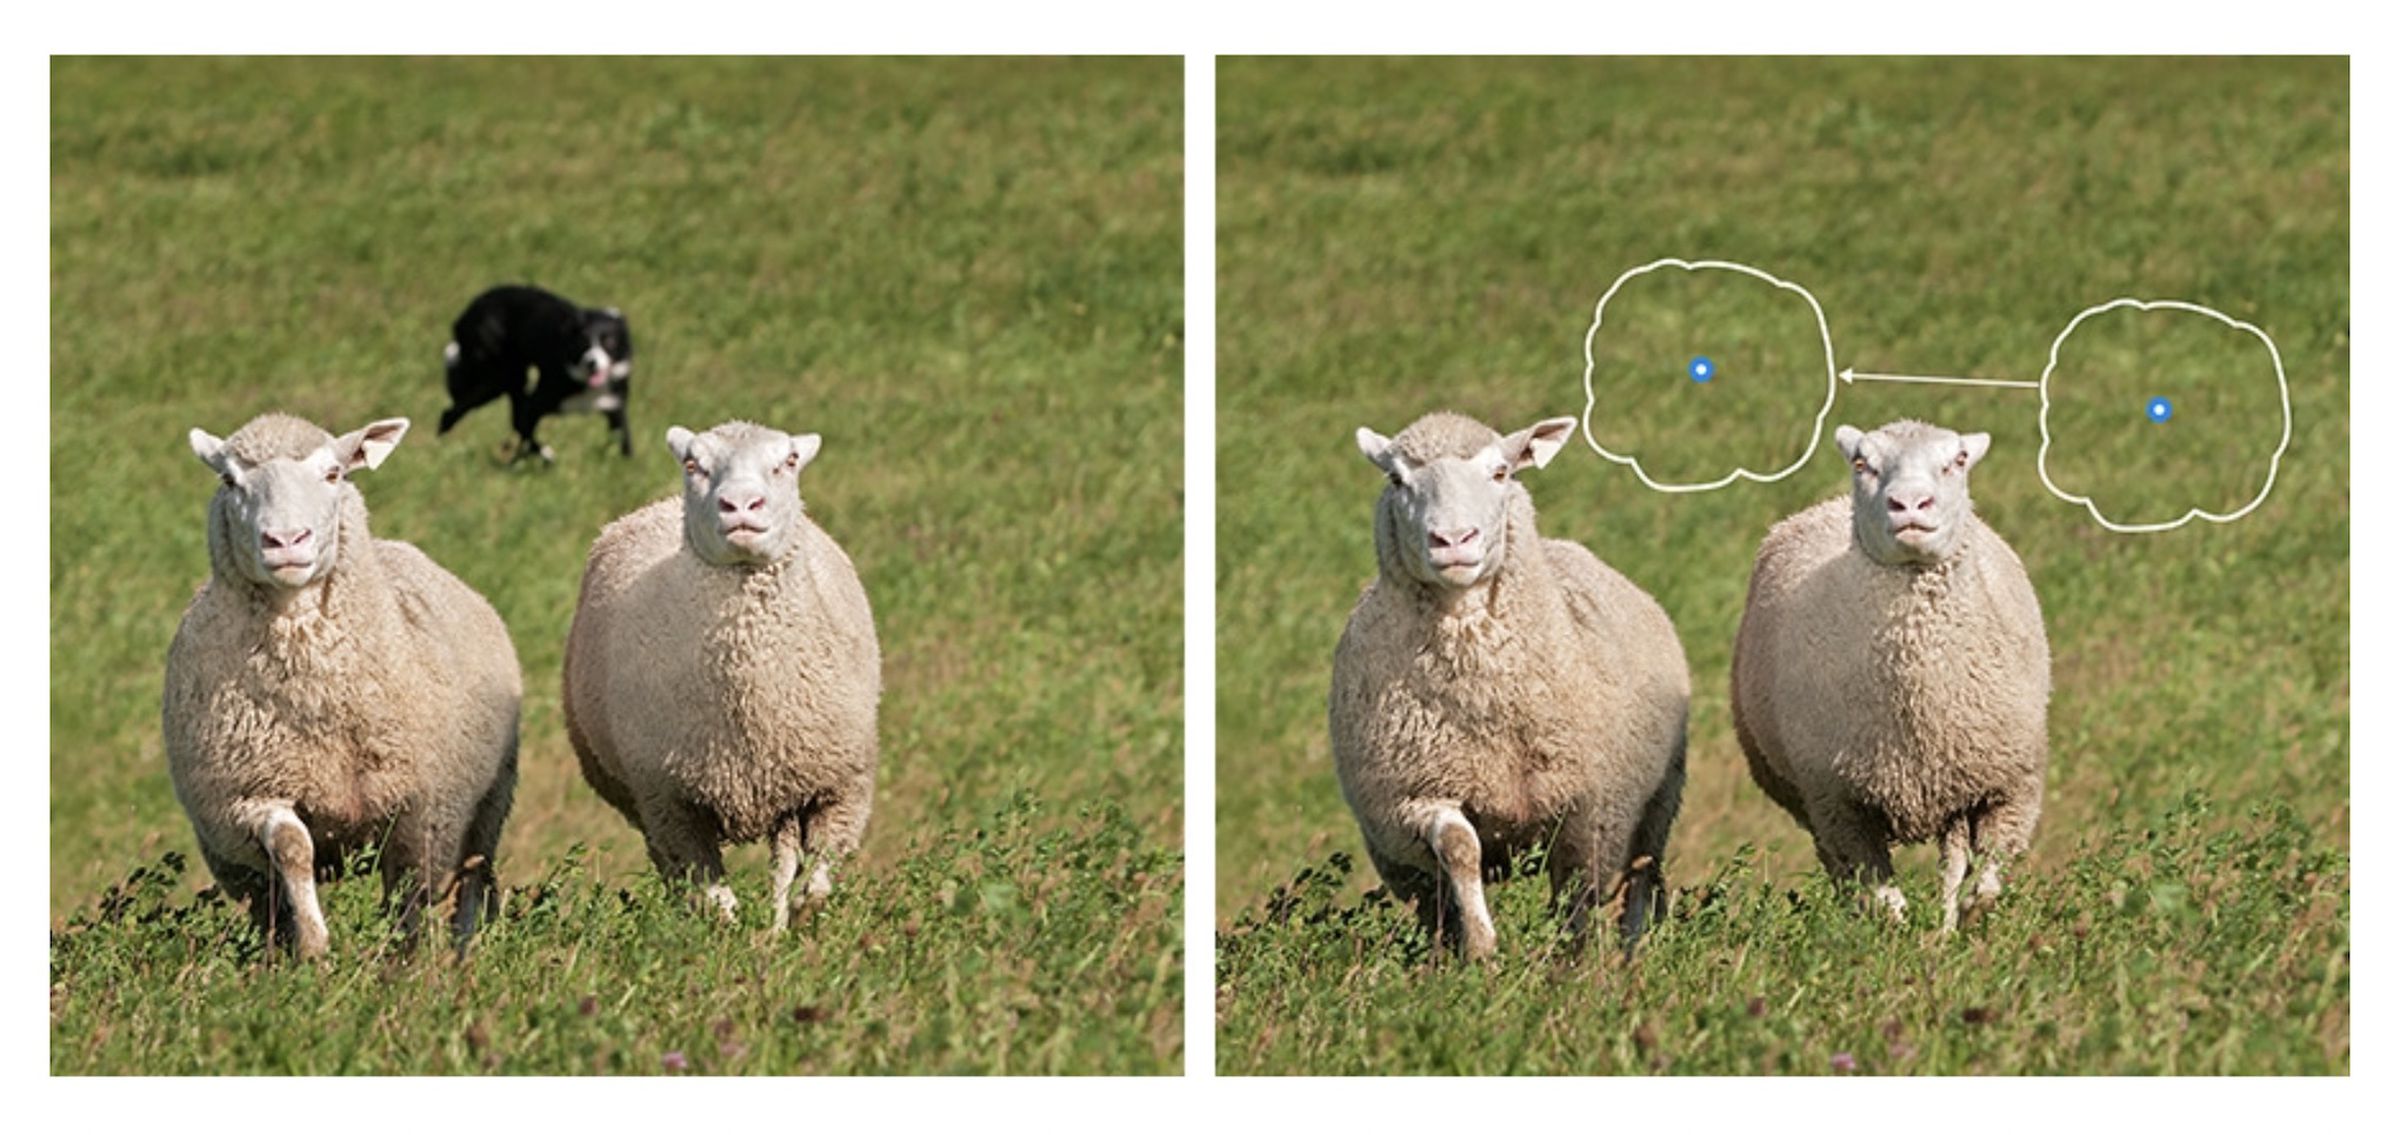 A screenshot of the previous heal tool in Adobe Lightroom being demonstrated on a scene with sheep and a dog in the background.